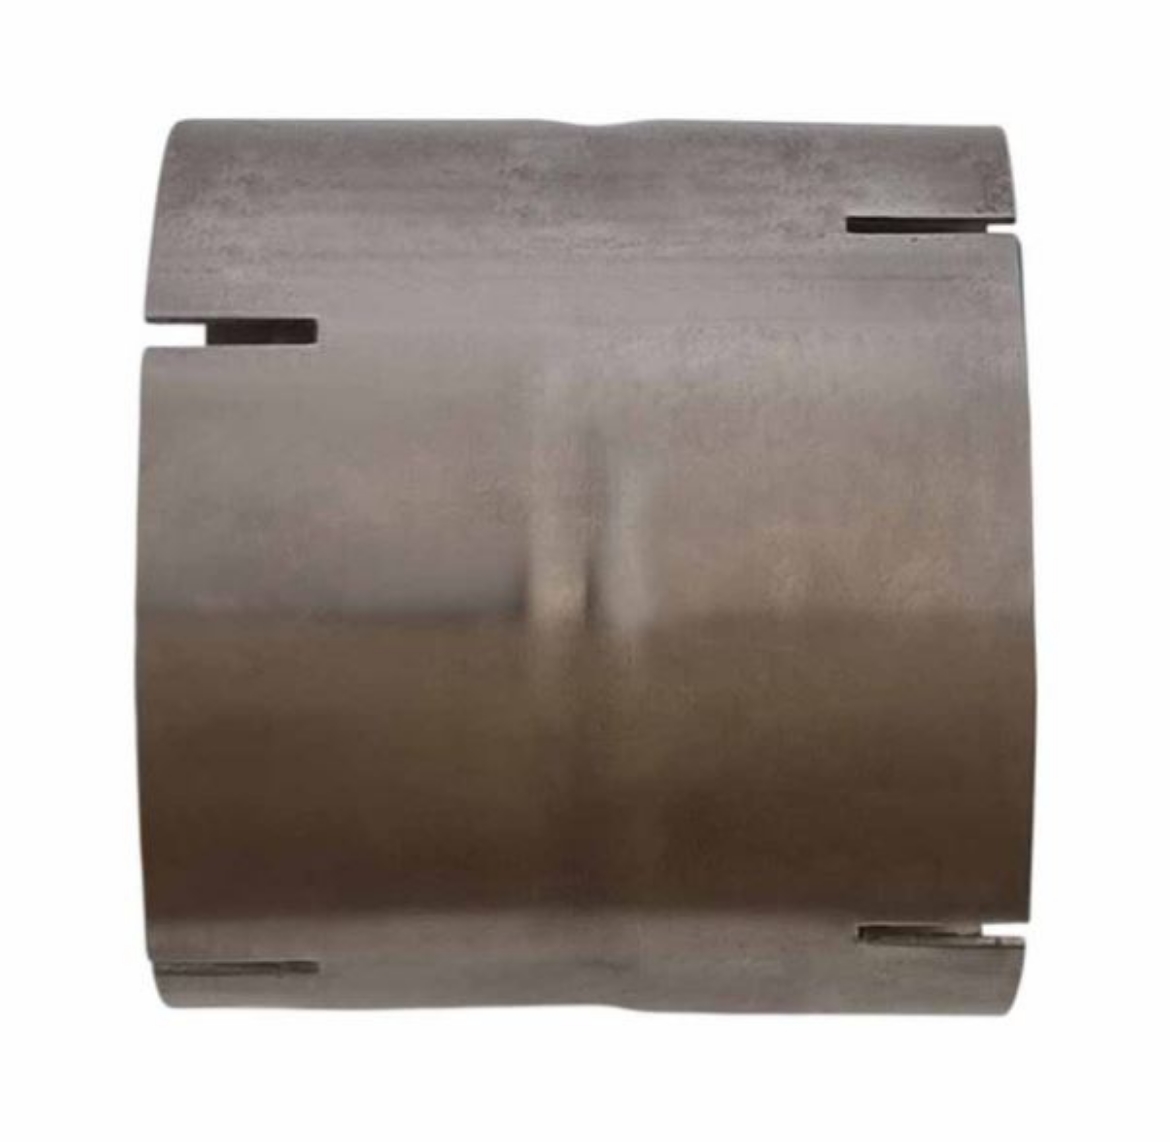 Picture of MILD STEEL DOUBLE COUPLER 5" ID x 5" L